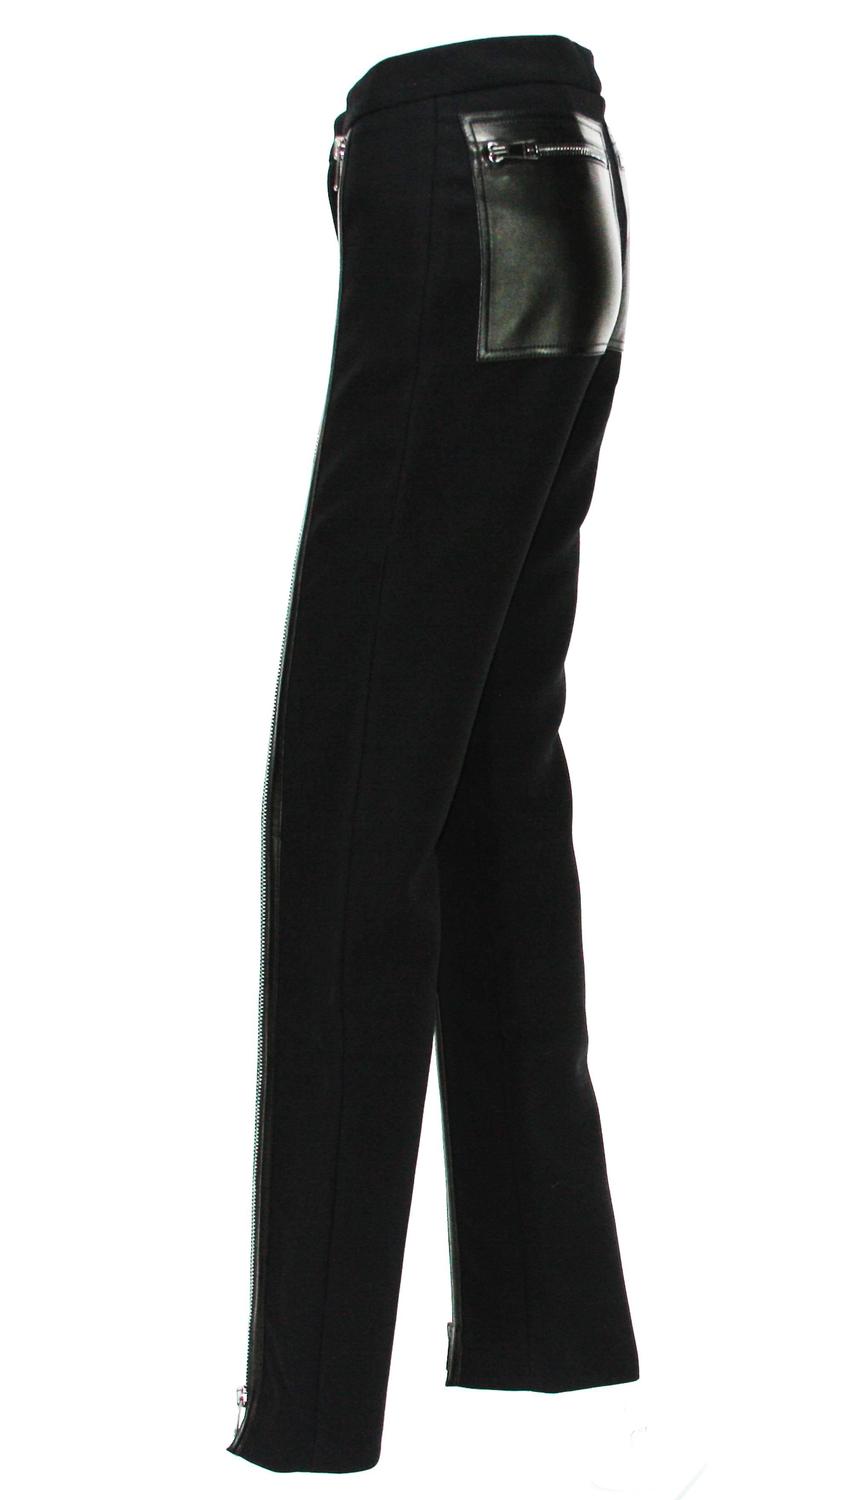 Tom Ford for Gucci F/W 2001 Zipper Leather Pants at 1stdibs